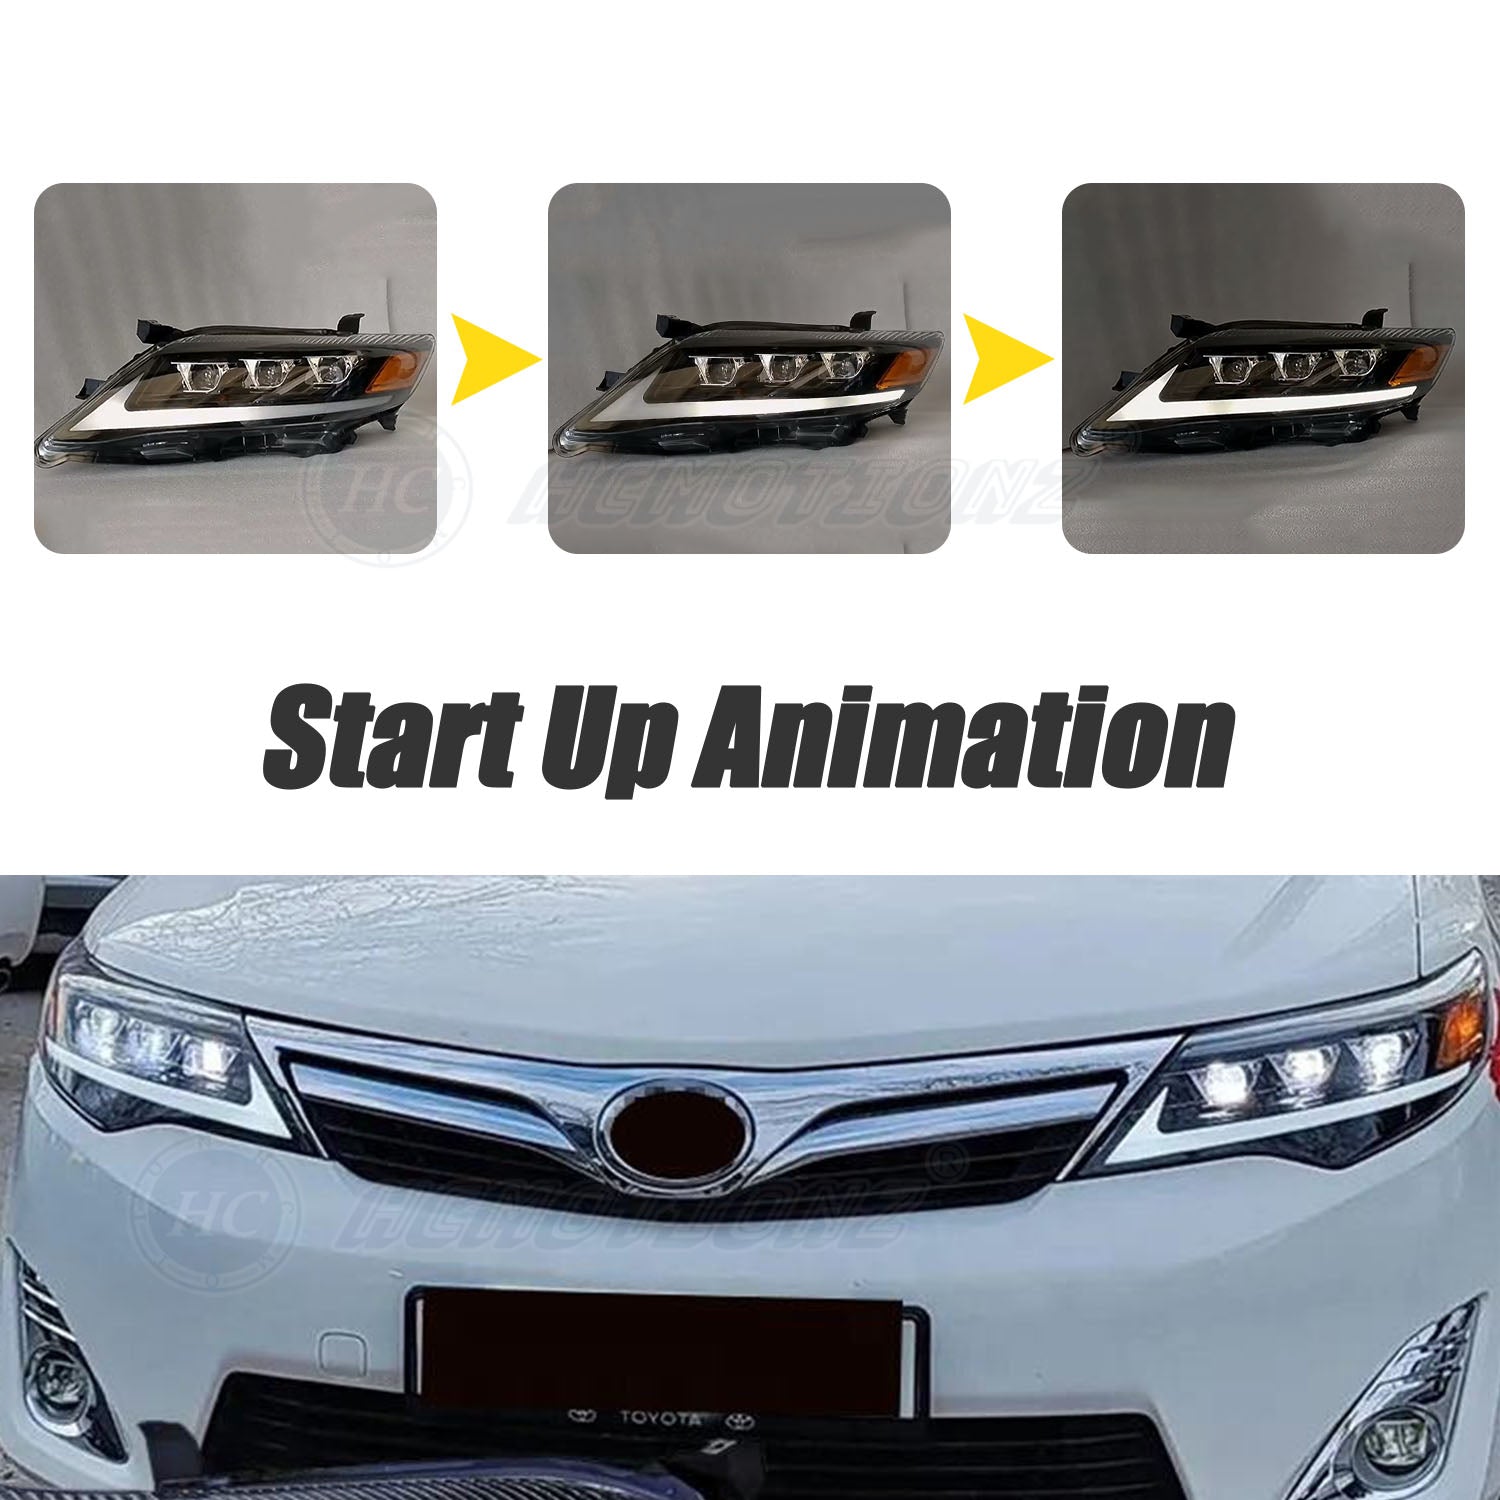 HCMOTION LED Headlights For Toyota Camry XV40 2010-2011 - HCMOTION